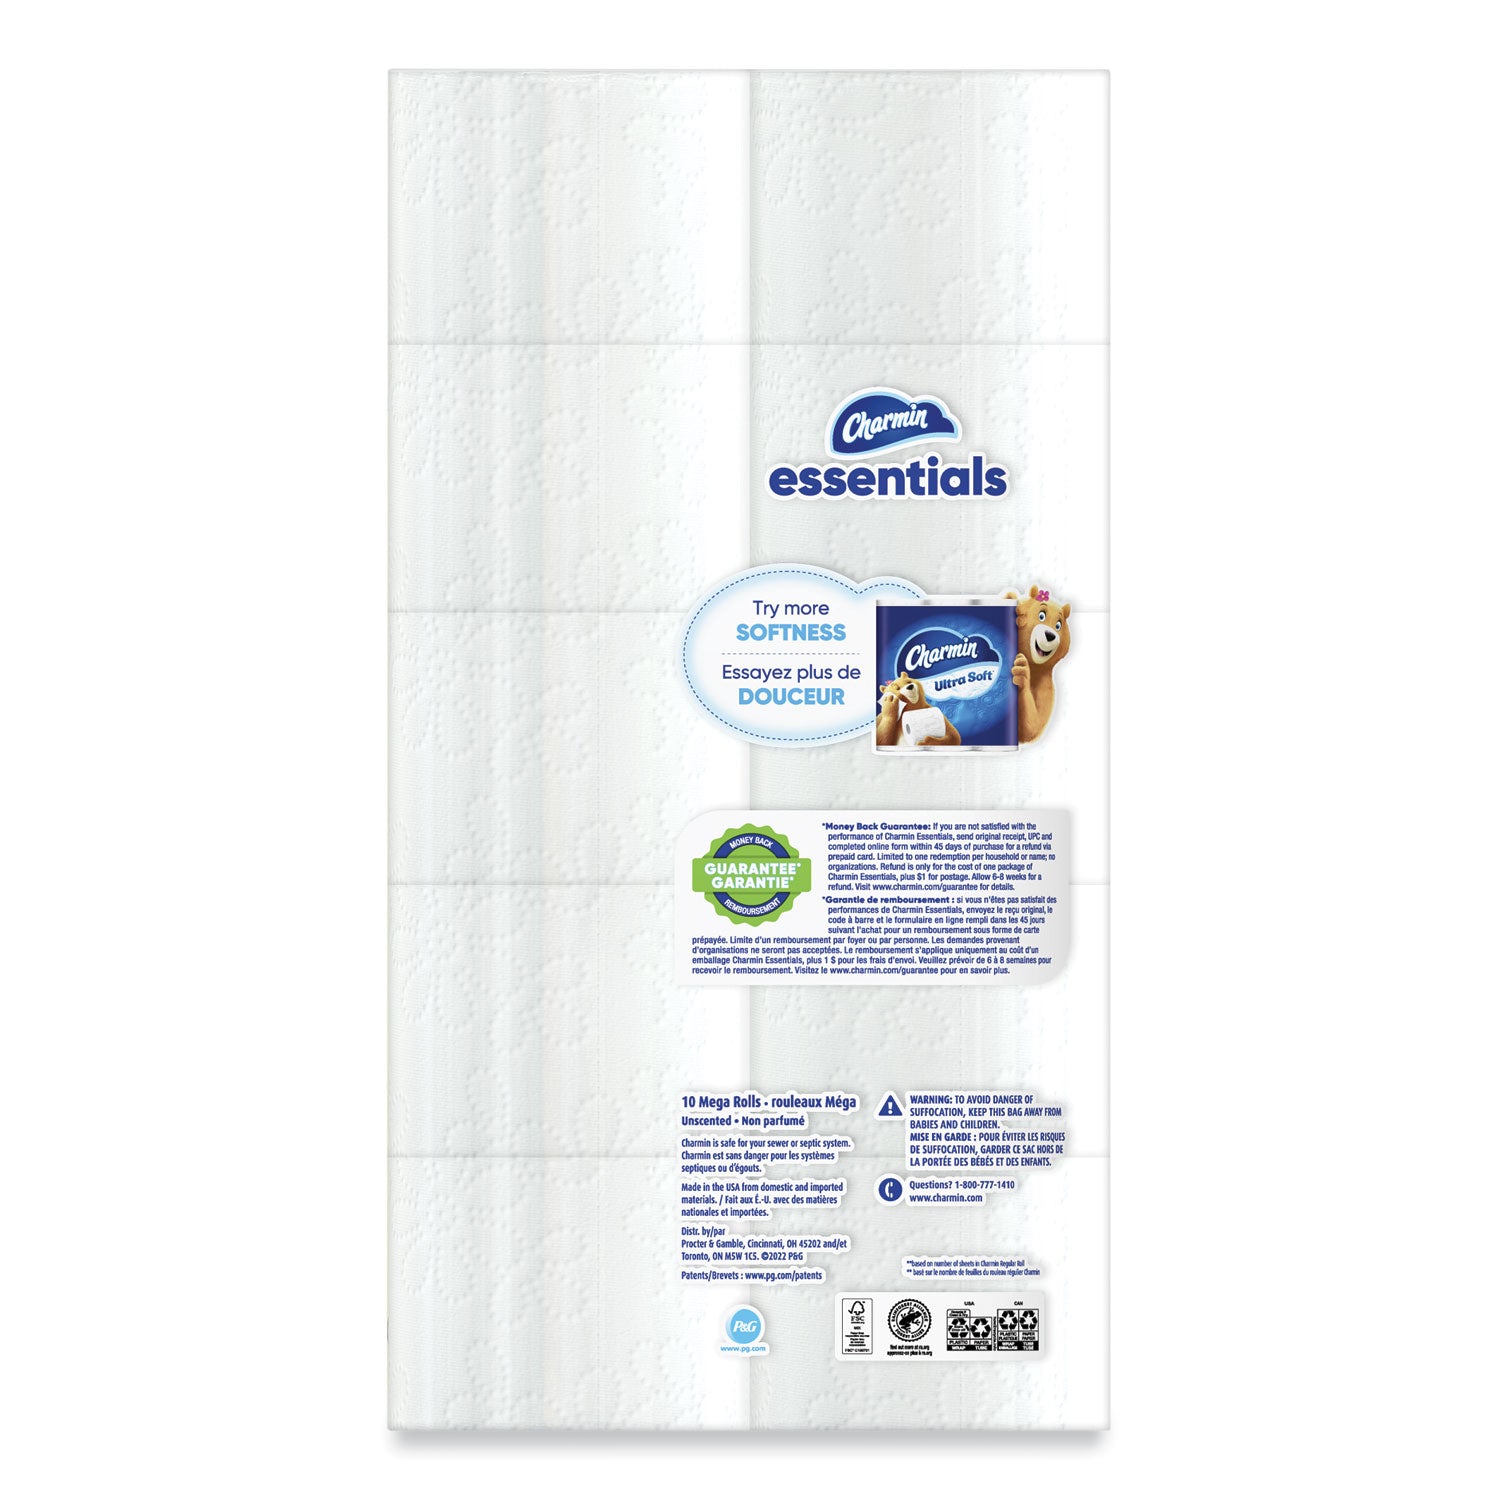 essentials-soft-bathroom-tissue-septic-safe-2-ply-white-330-sheets-roll-30-rolls-carton_pgc04534 - 4